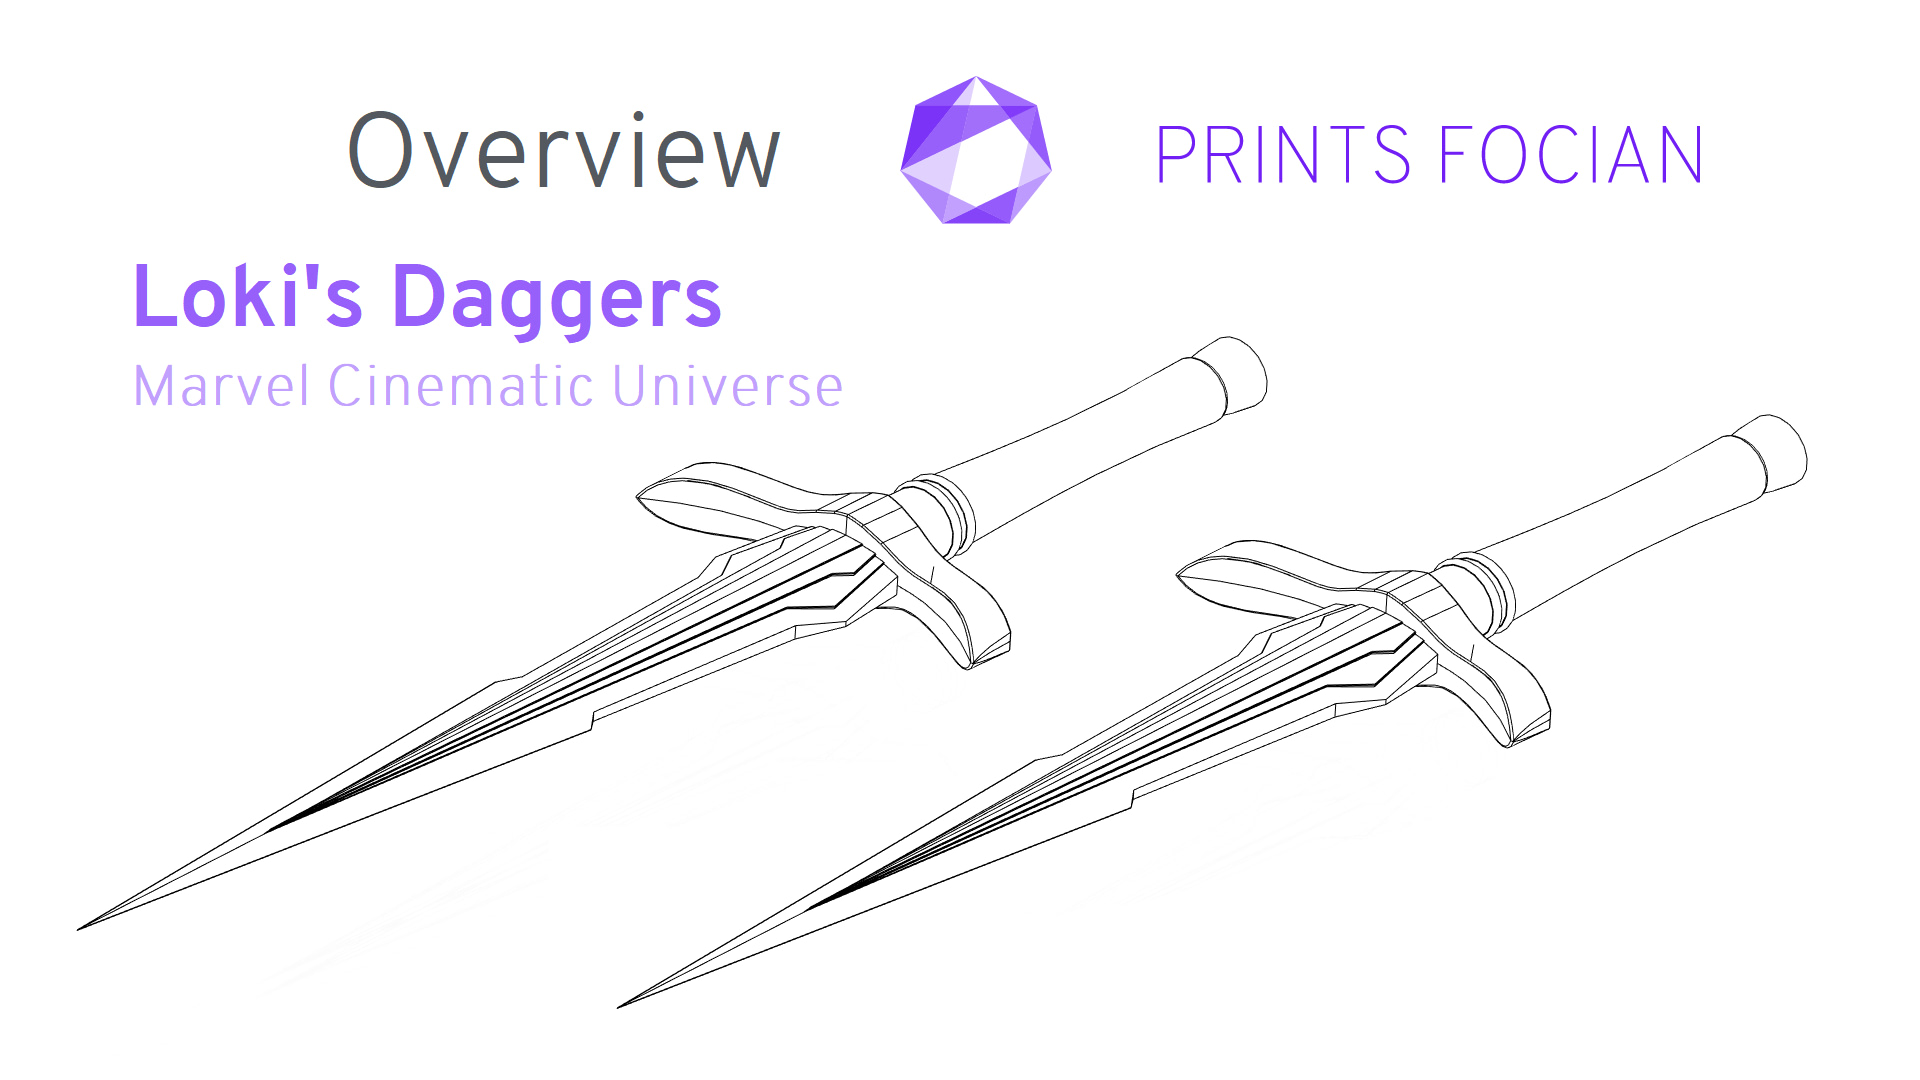 Wireframe image of the Loki's Daggers on a white background. Prints Focian Icon top and central. Text: Purple Prints Focian, Loki's Daggers, Marvel Cinimatic Universe MCU and dark grey Overview